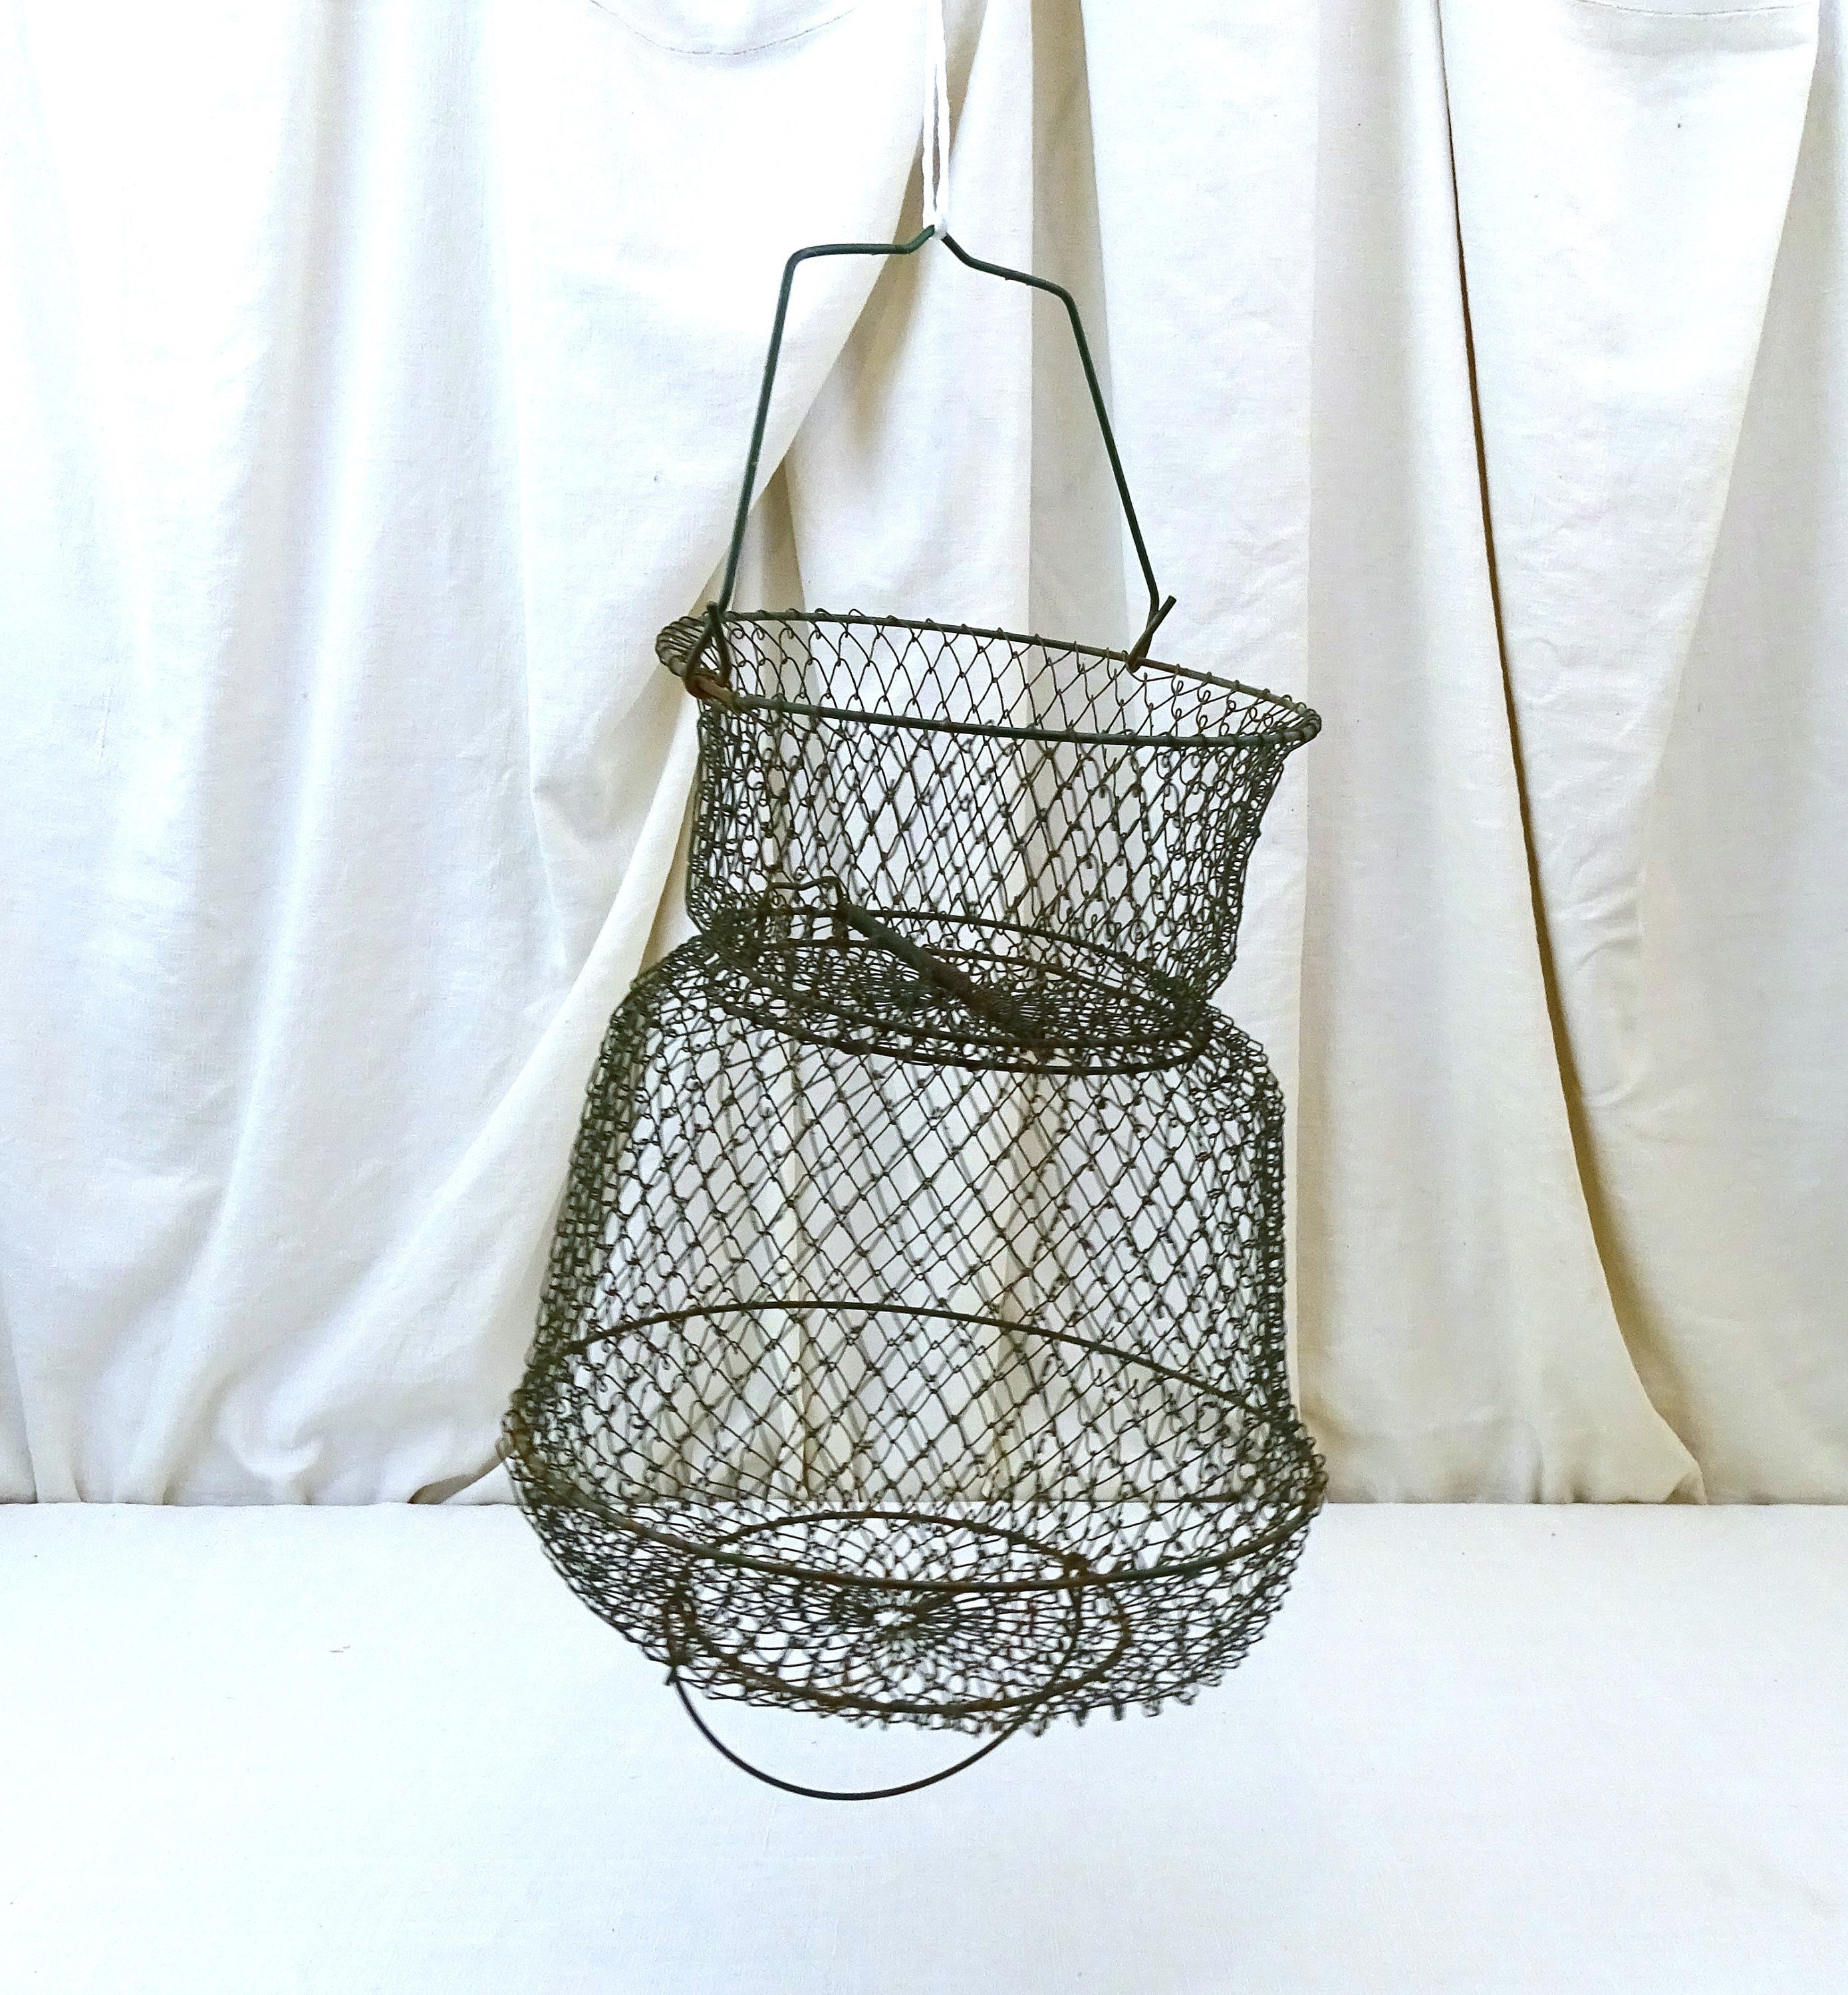 Large Vintage French Folding Wire Mesh Fish Basket, Retro Fishing Equipment  in Green Painted Metal, Upycycled Kitchen Decor